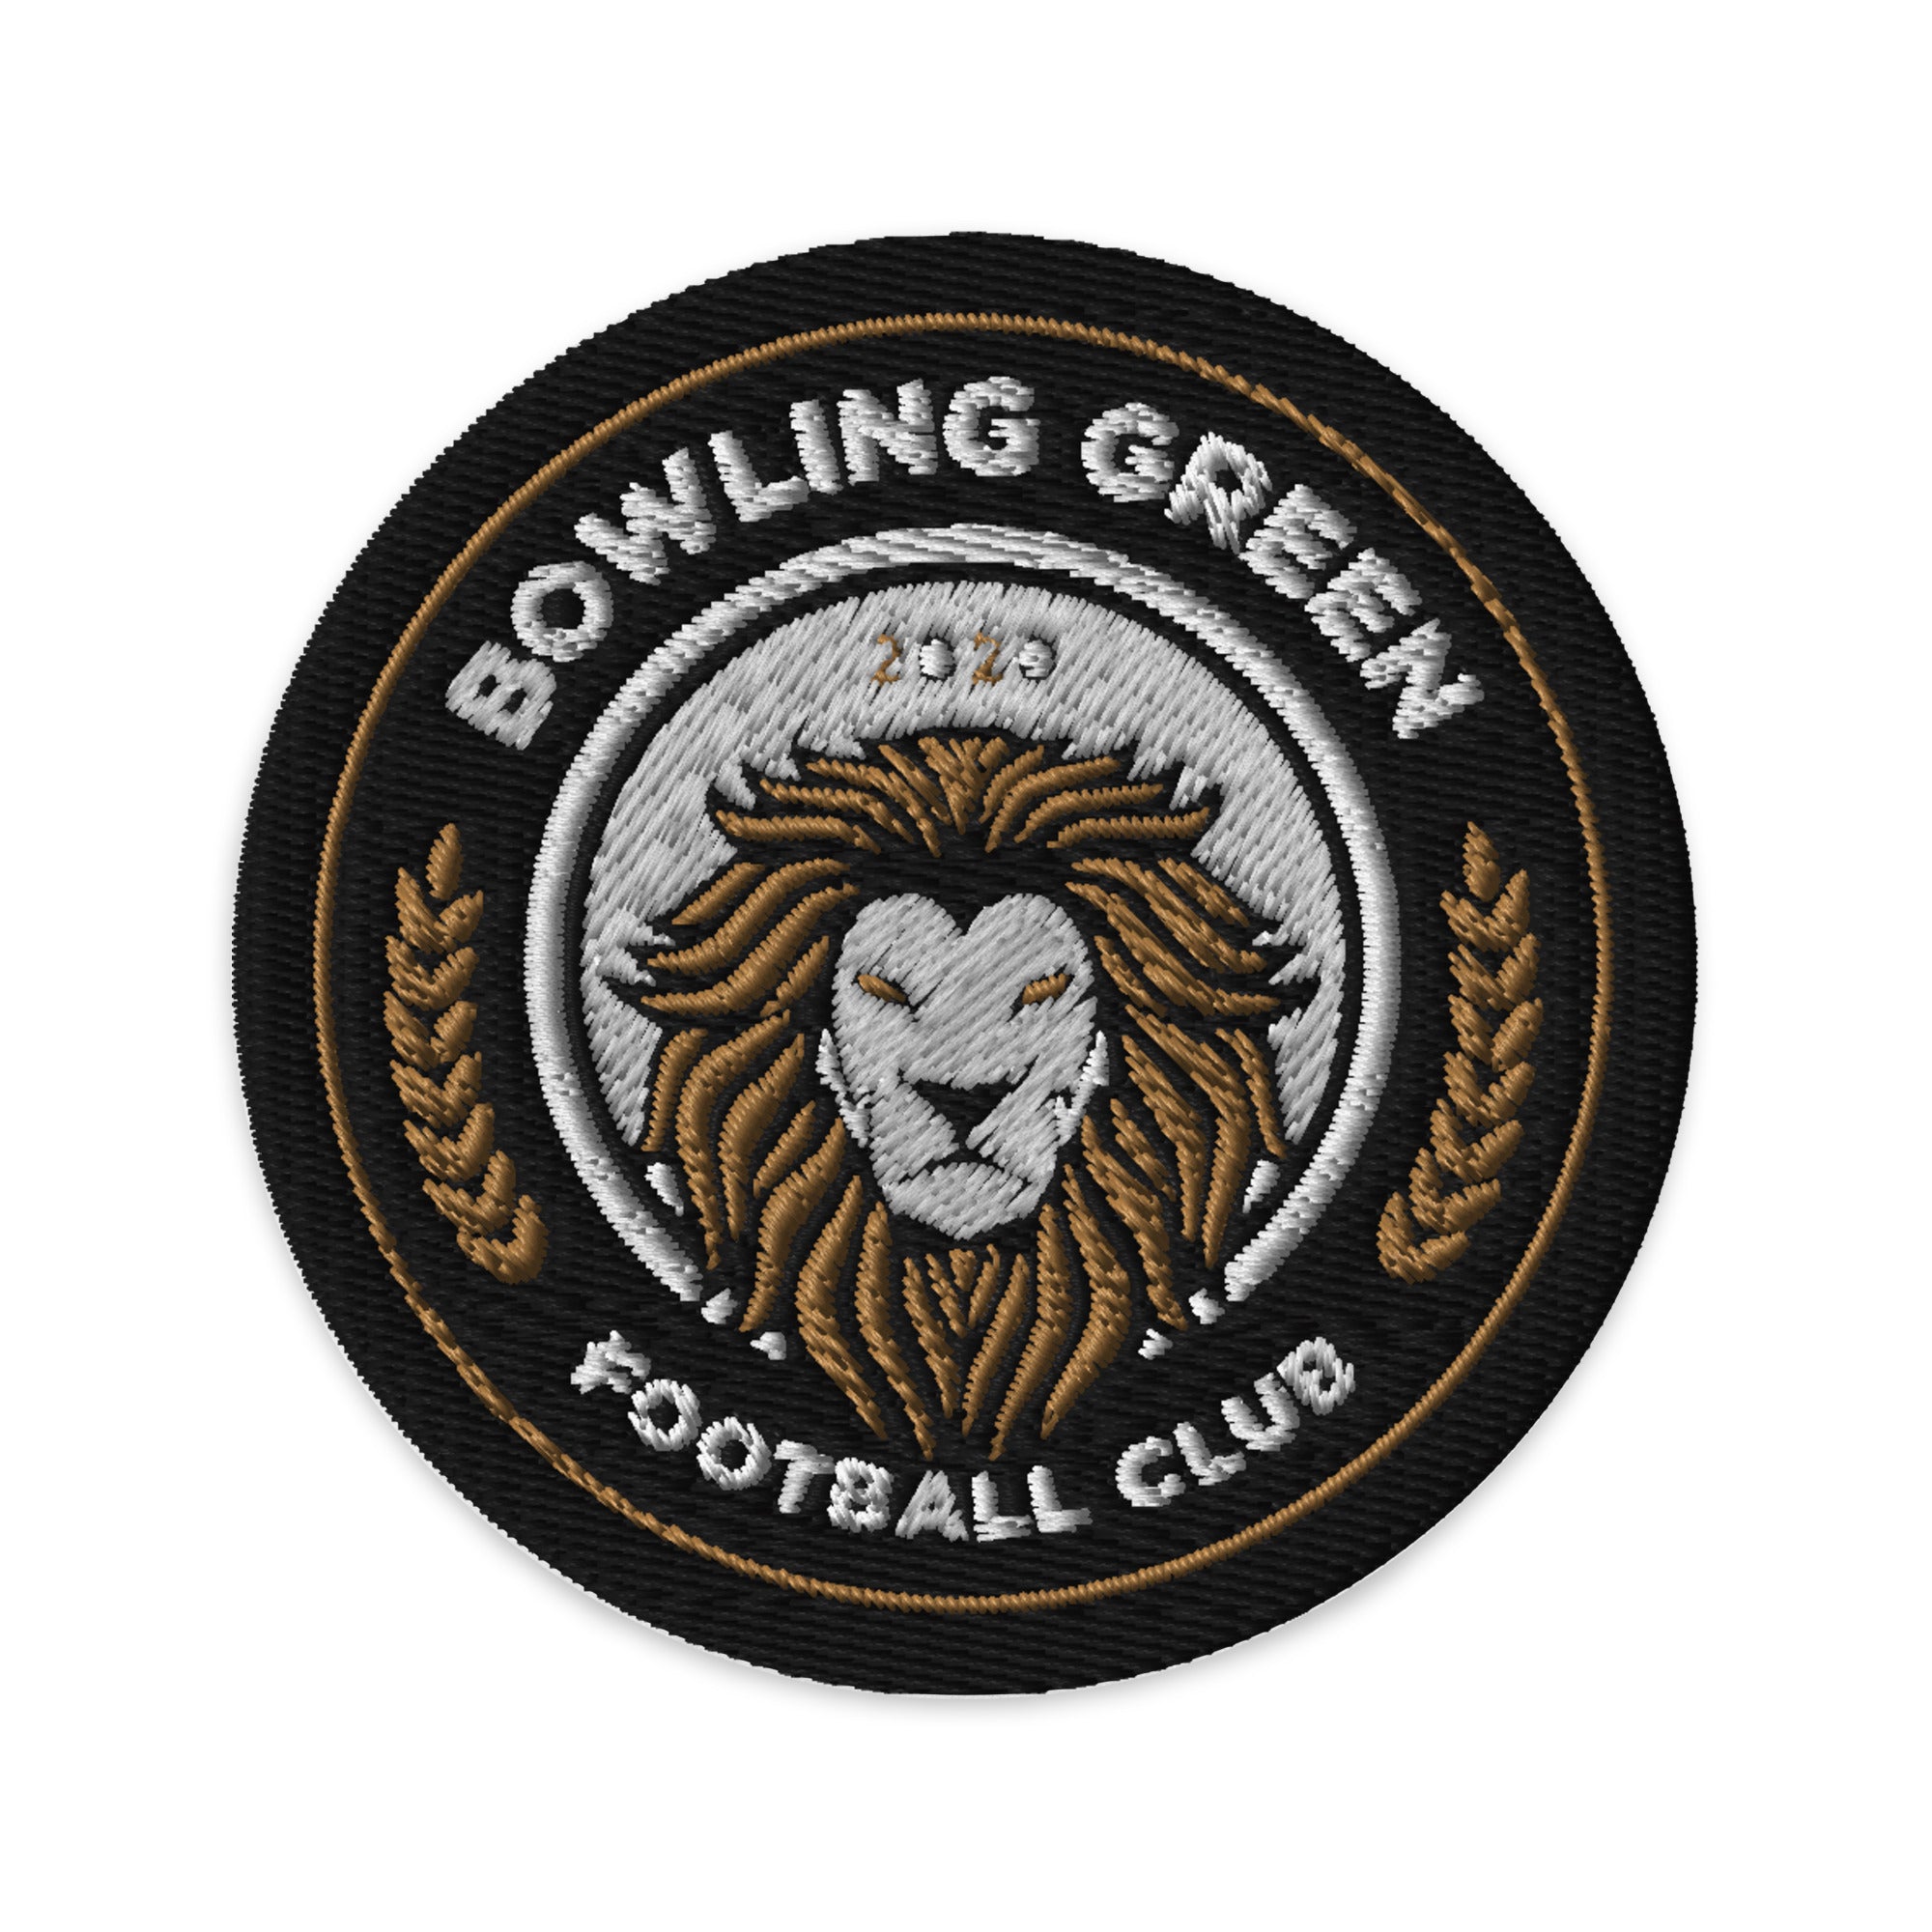 BGFC Logo Embroidered patches